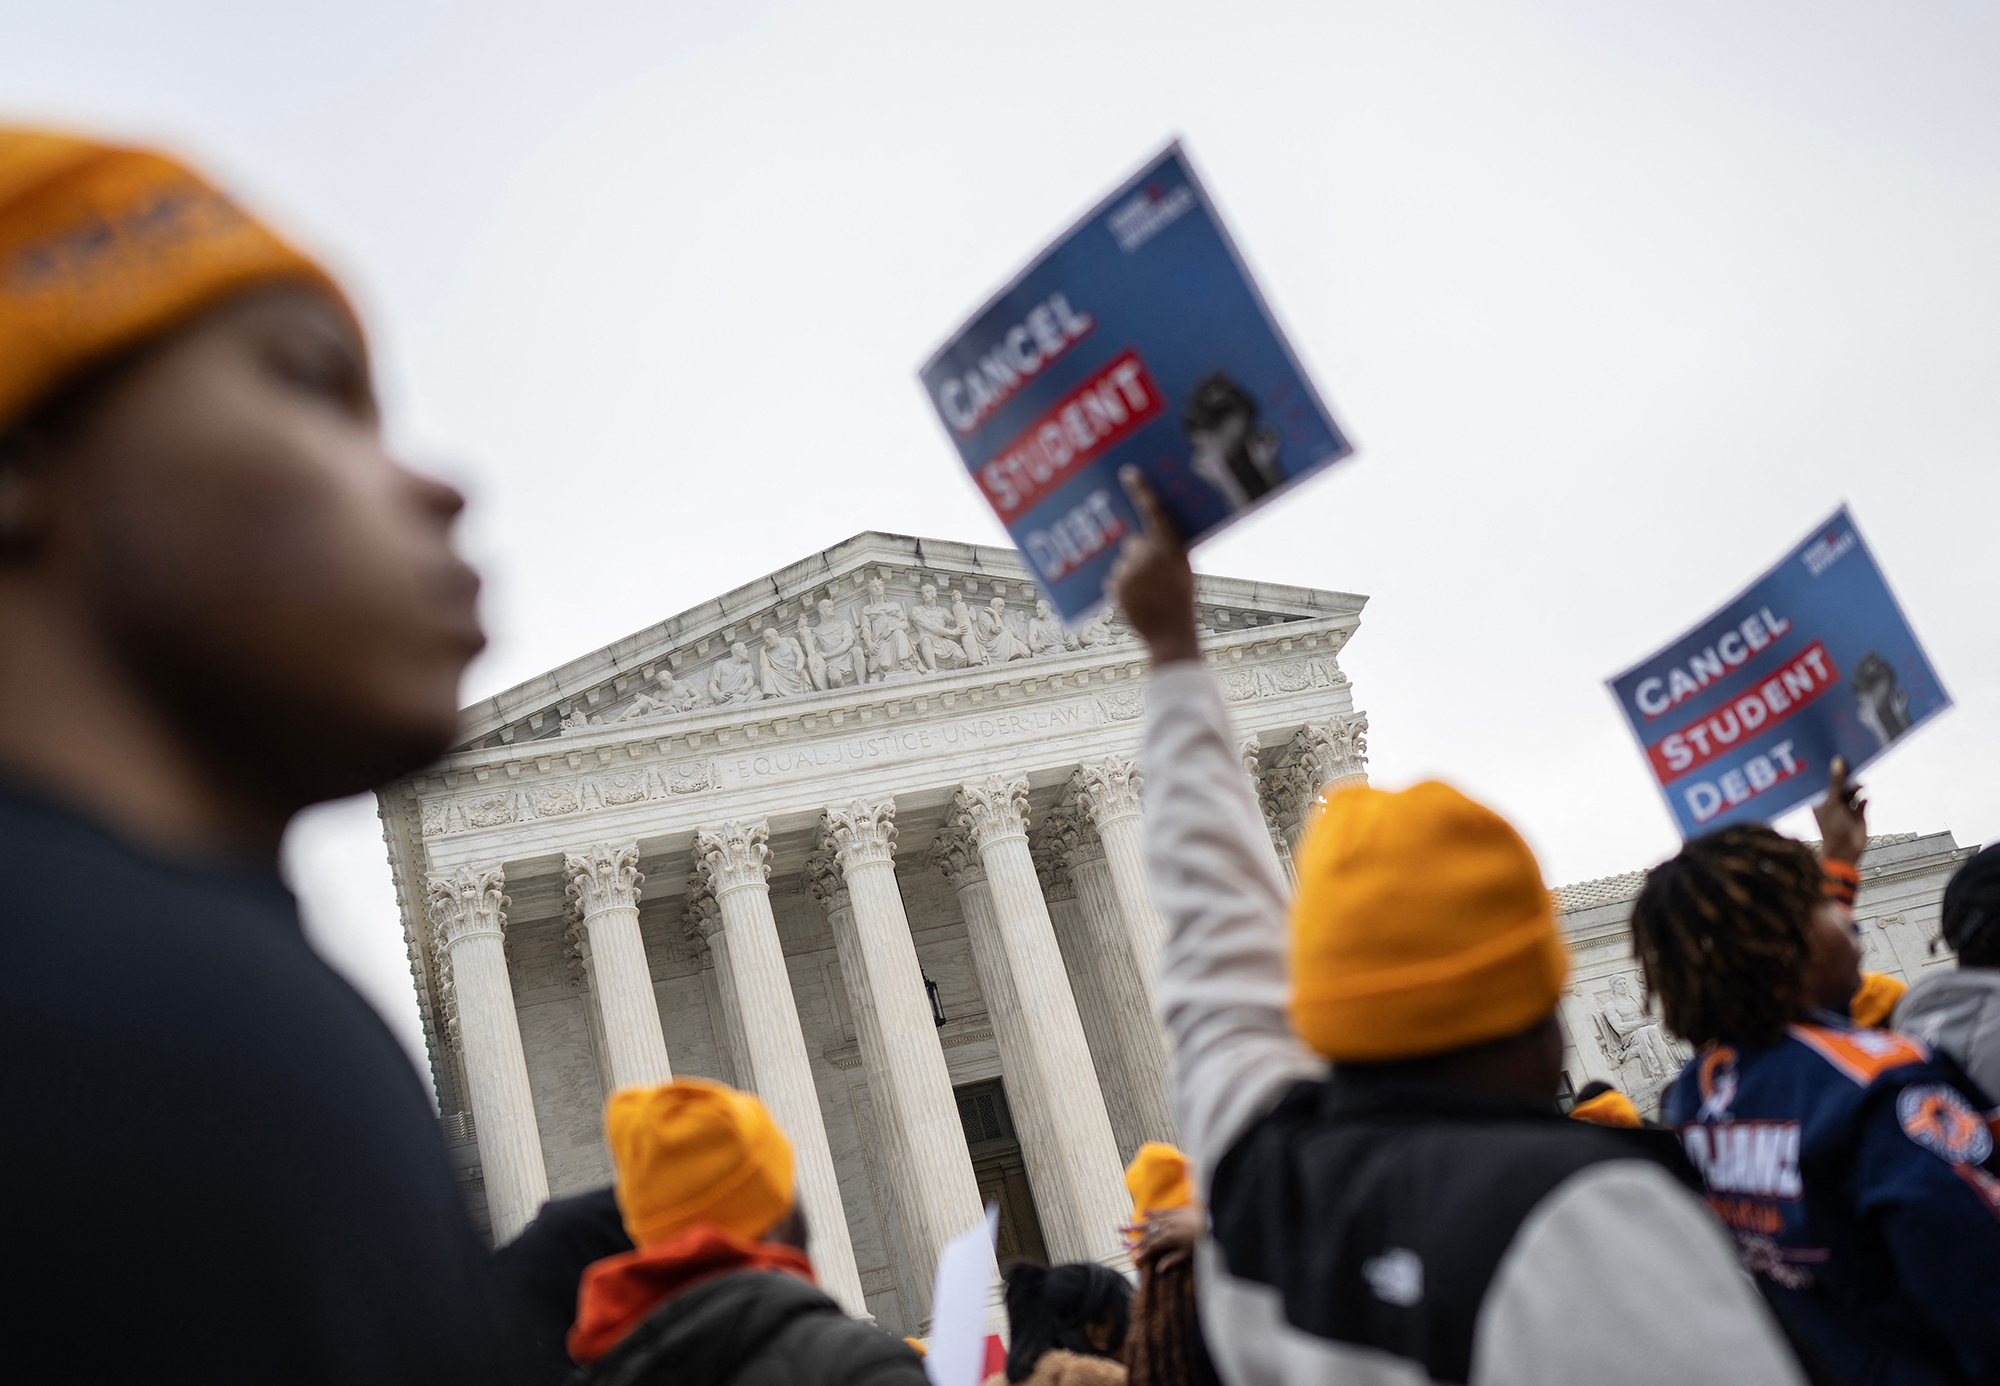 Activists and students protest in front of the Supreme Court during a rally for student debt cancellation in Washington, DC, on February 28.